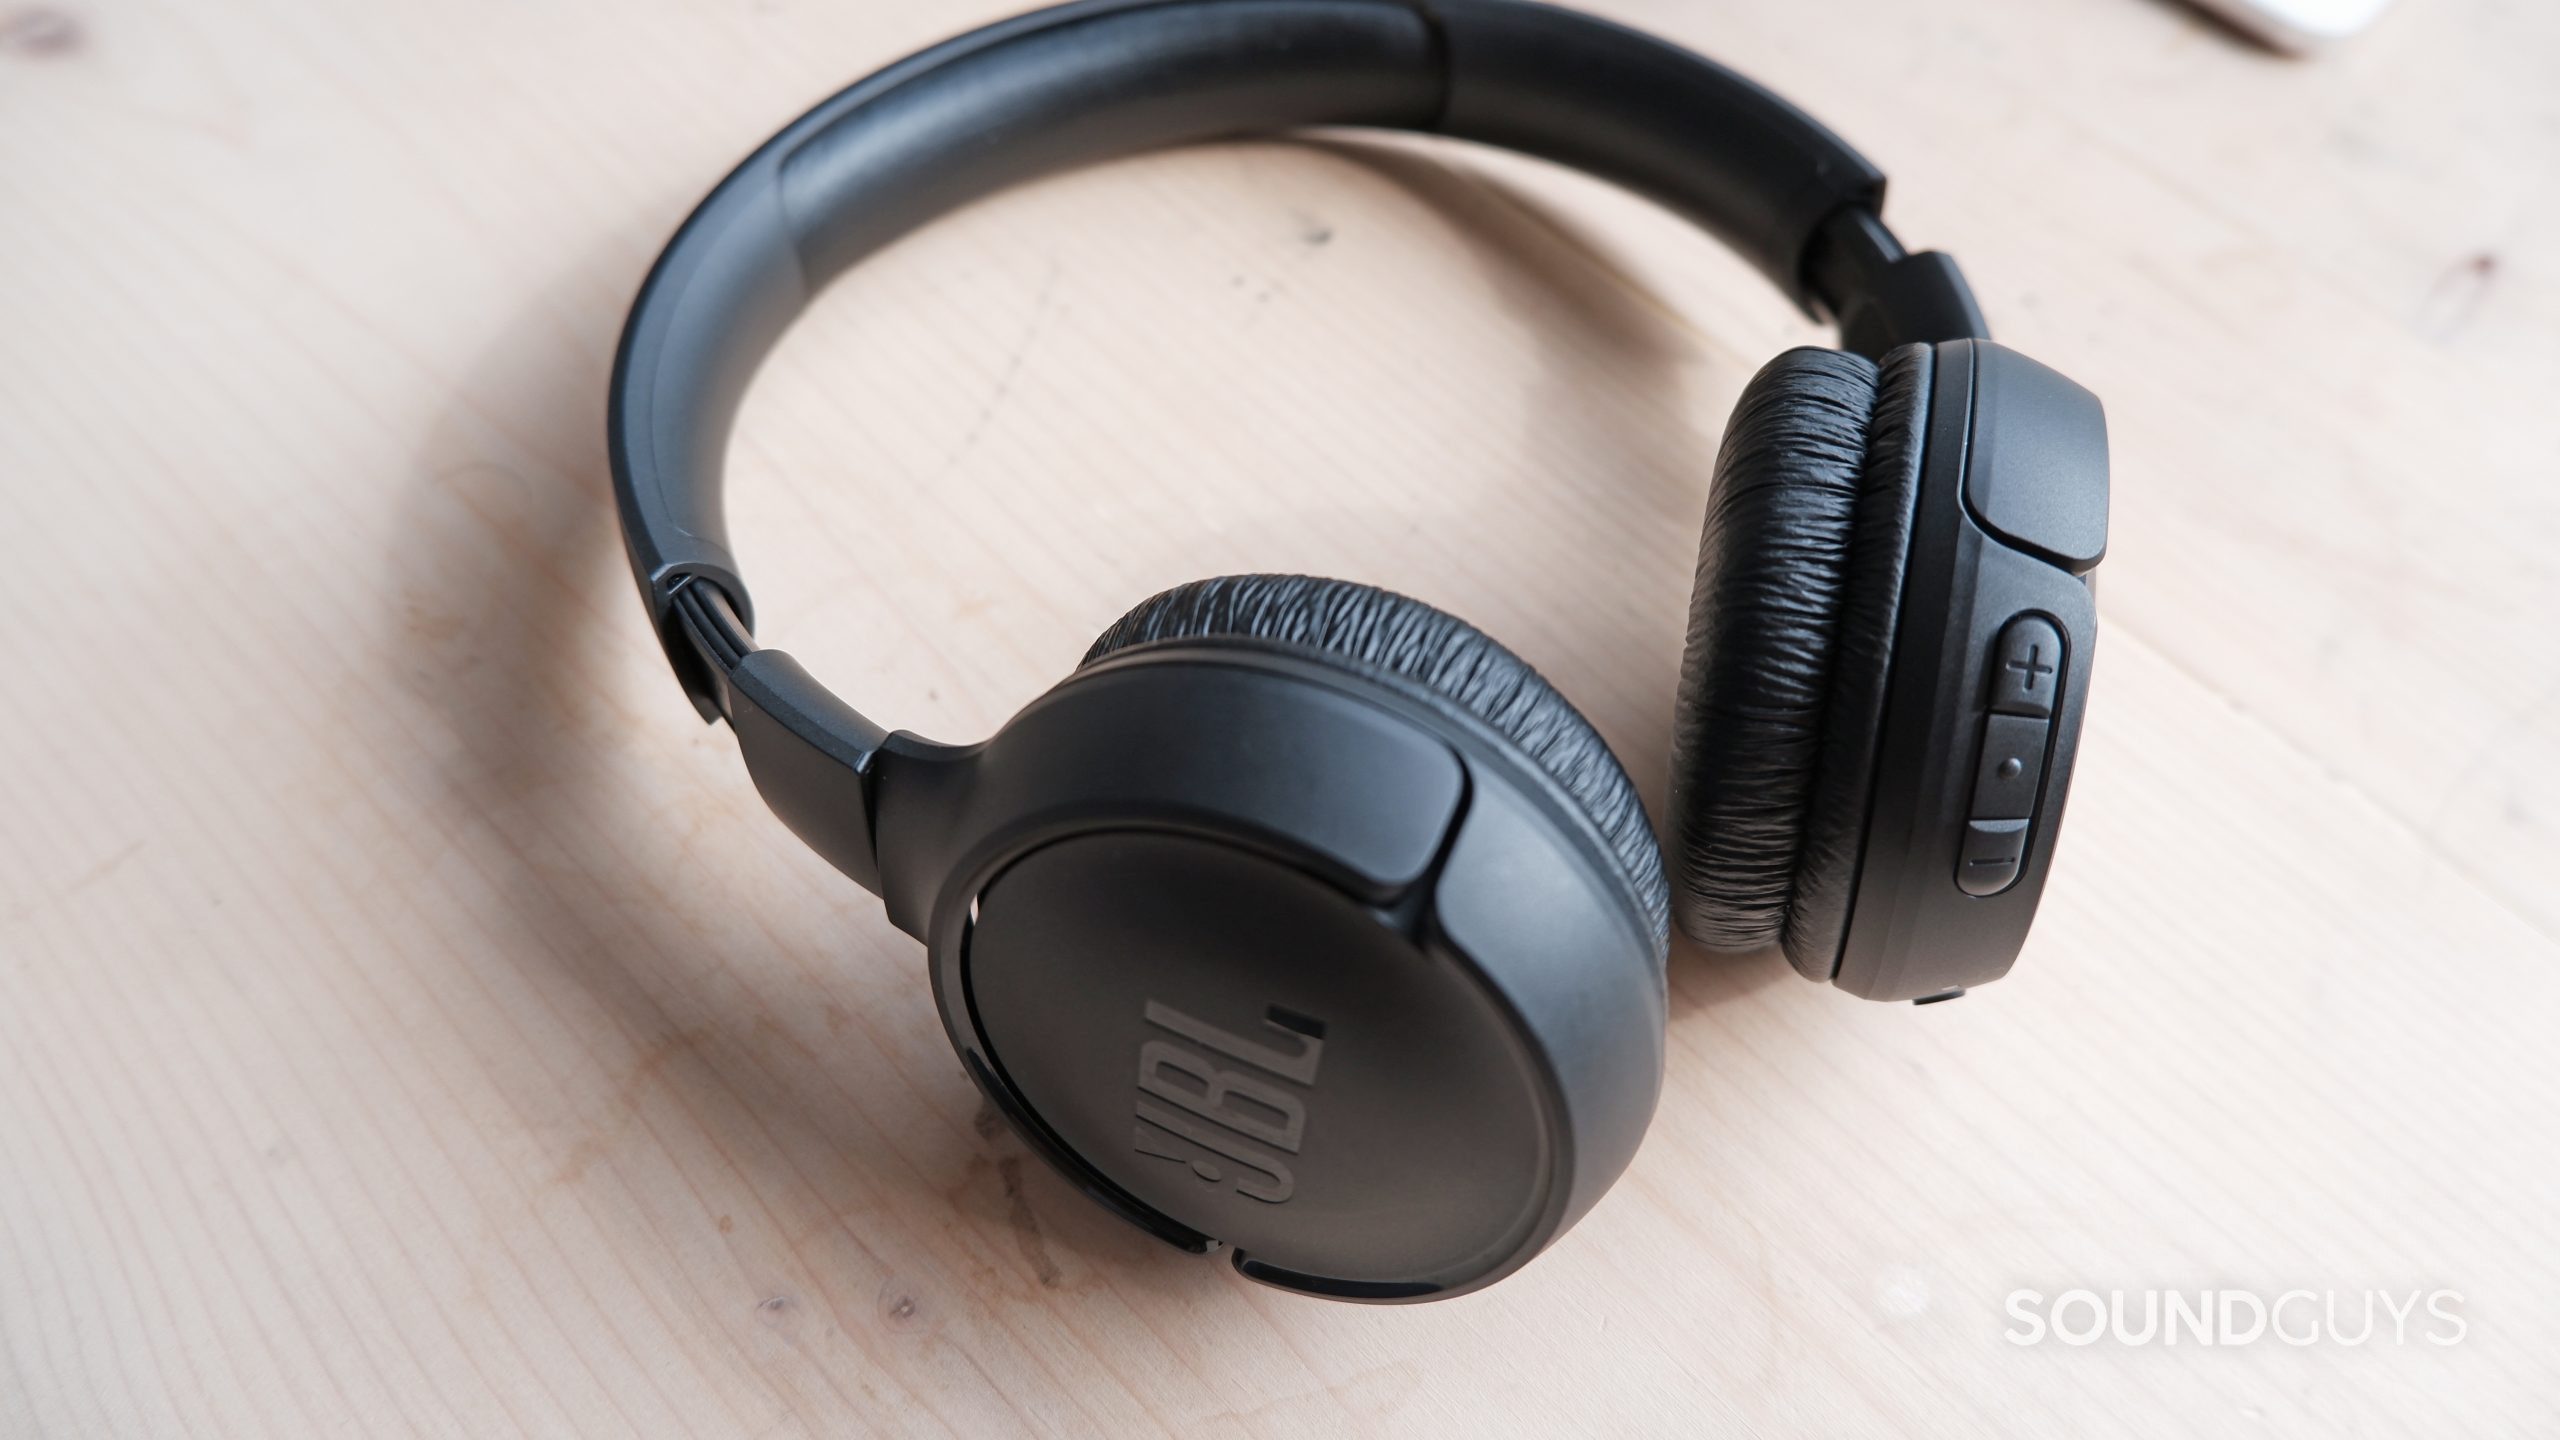 The JBL Tune 510BT headset on a wooden table, showing the volume buttons and ear cups.